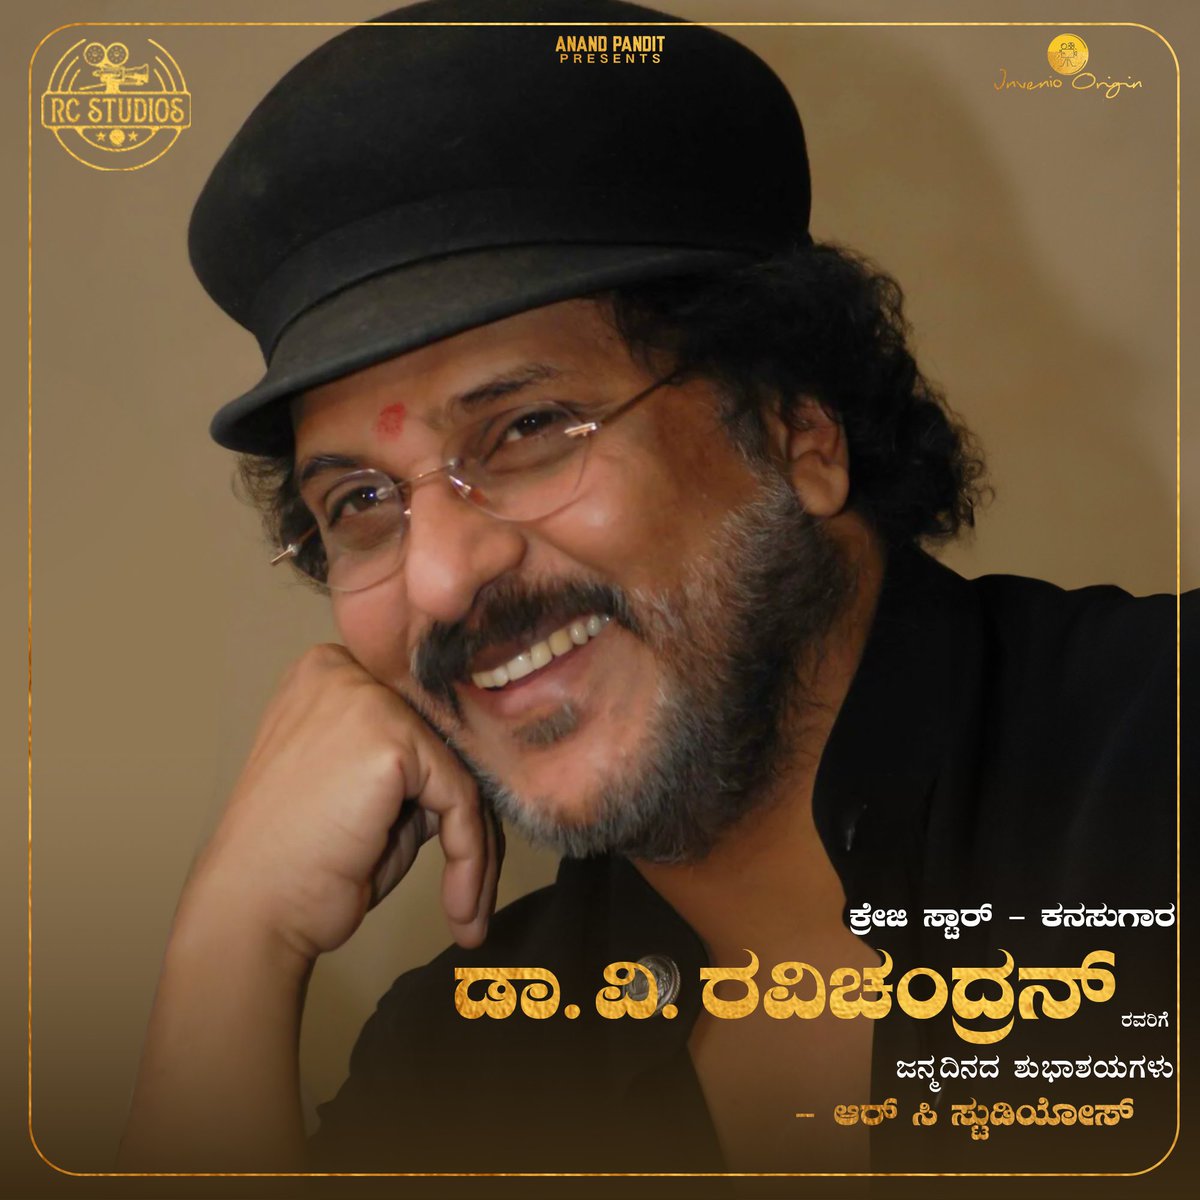 Hearty Birthday Wishes to our beloved Crazy Star V Ravichandran Sir, whose visionary creativity expanded the Kannada film industry, enriched cinematic opulence and technical quality, and ignited the hearts of romantics with his powerhouse performances.
#crazystar #vravichandran